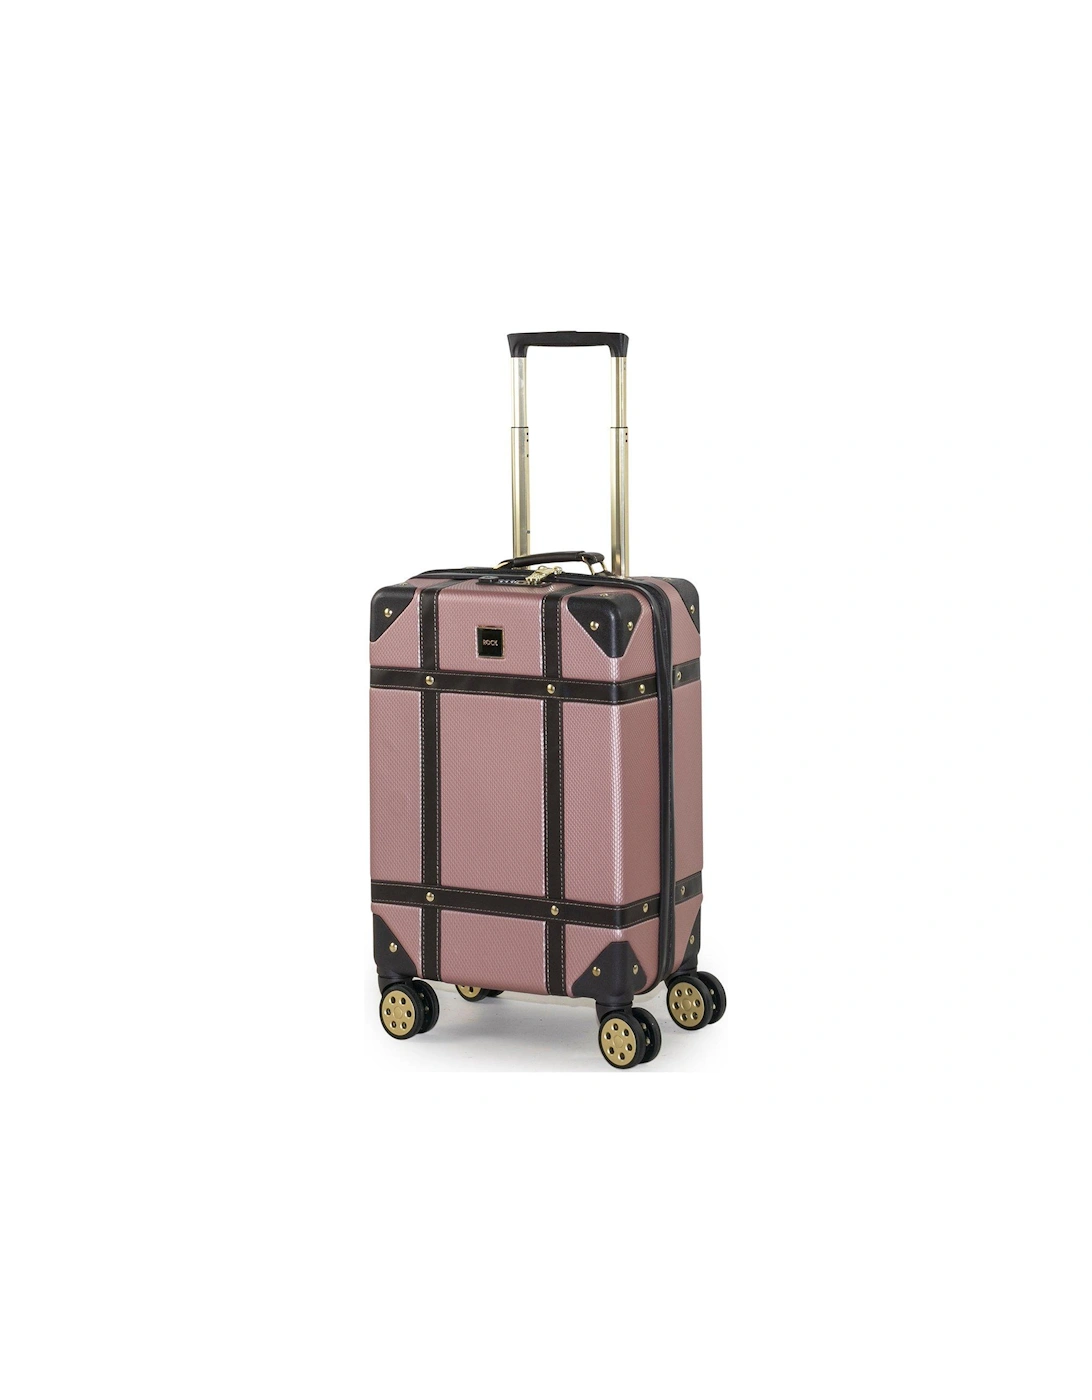 Vintage Carry-on 8-Wheel Suitcase - Rose Pink, 2 of 1